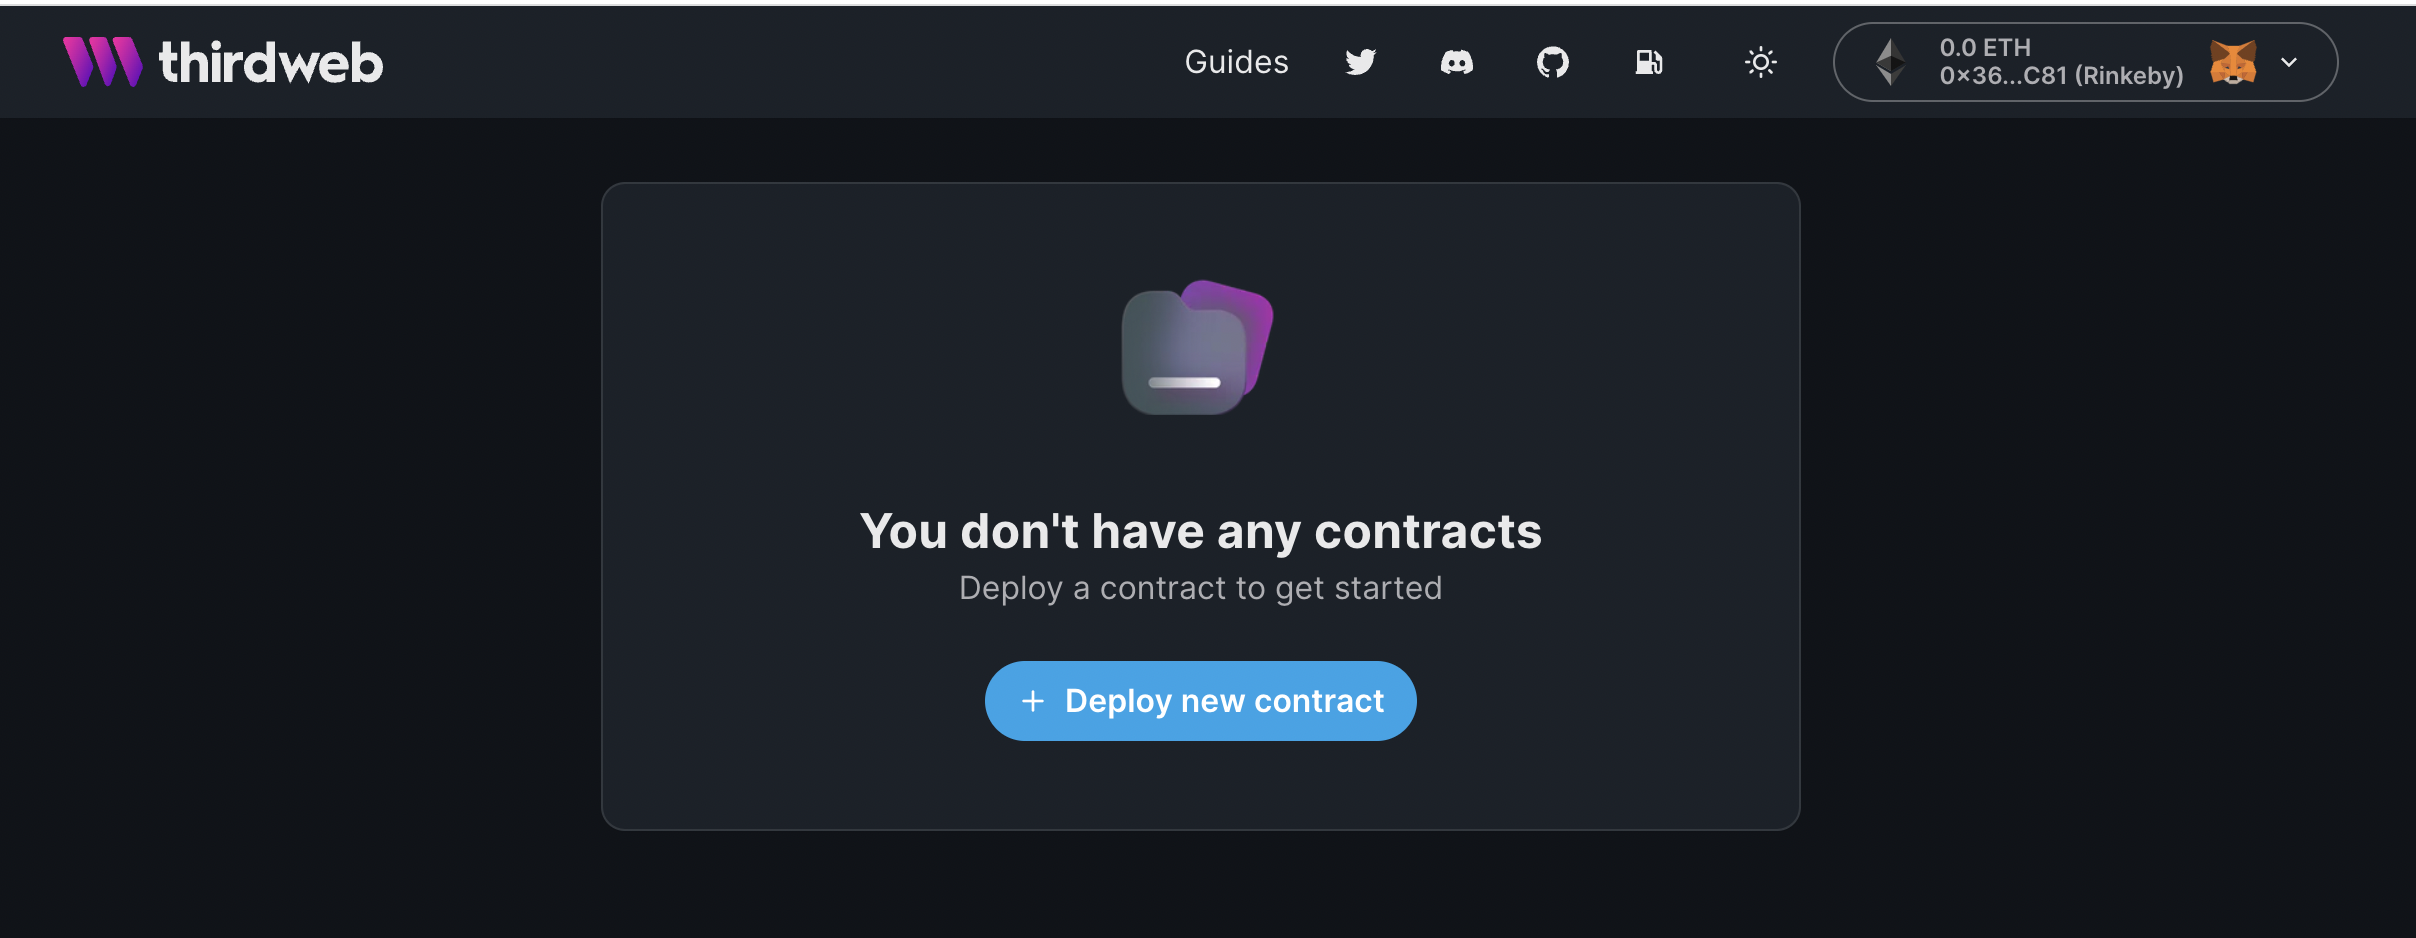 screenshot of deploy contract button on thirdweb